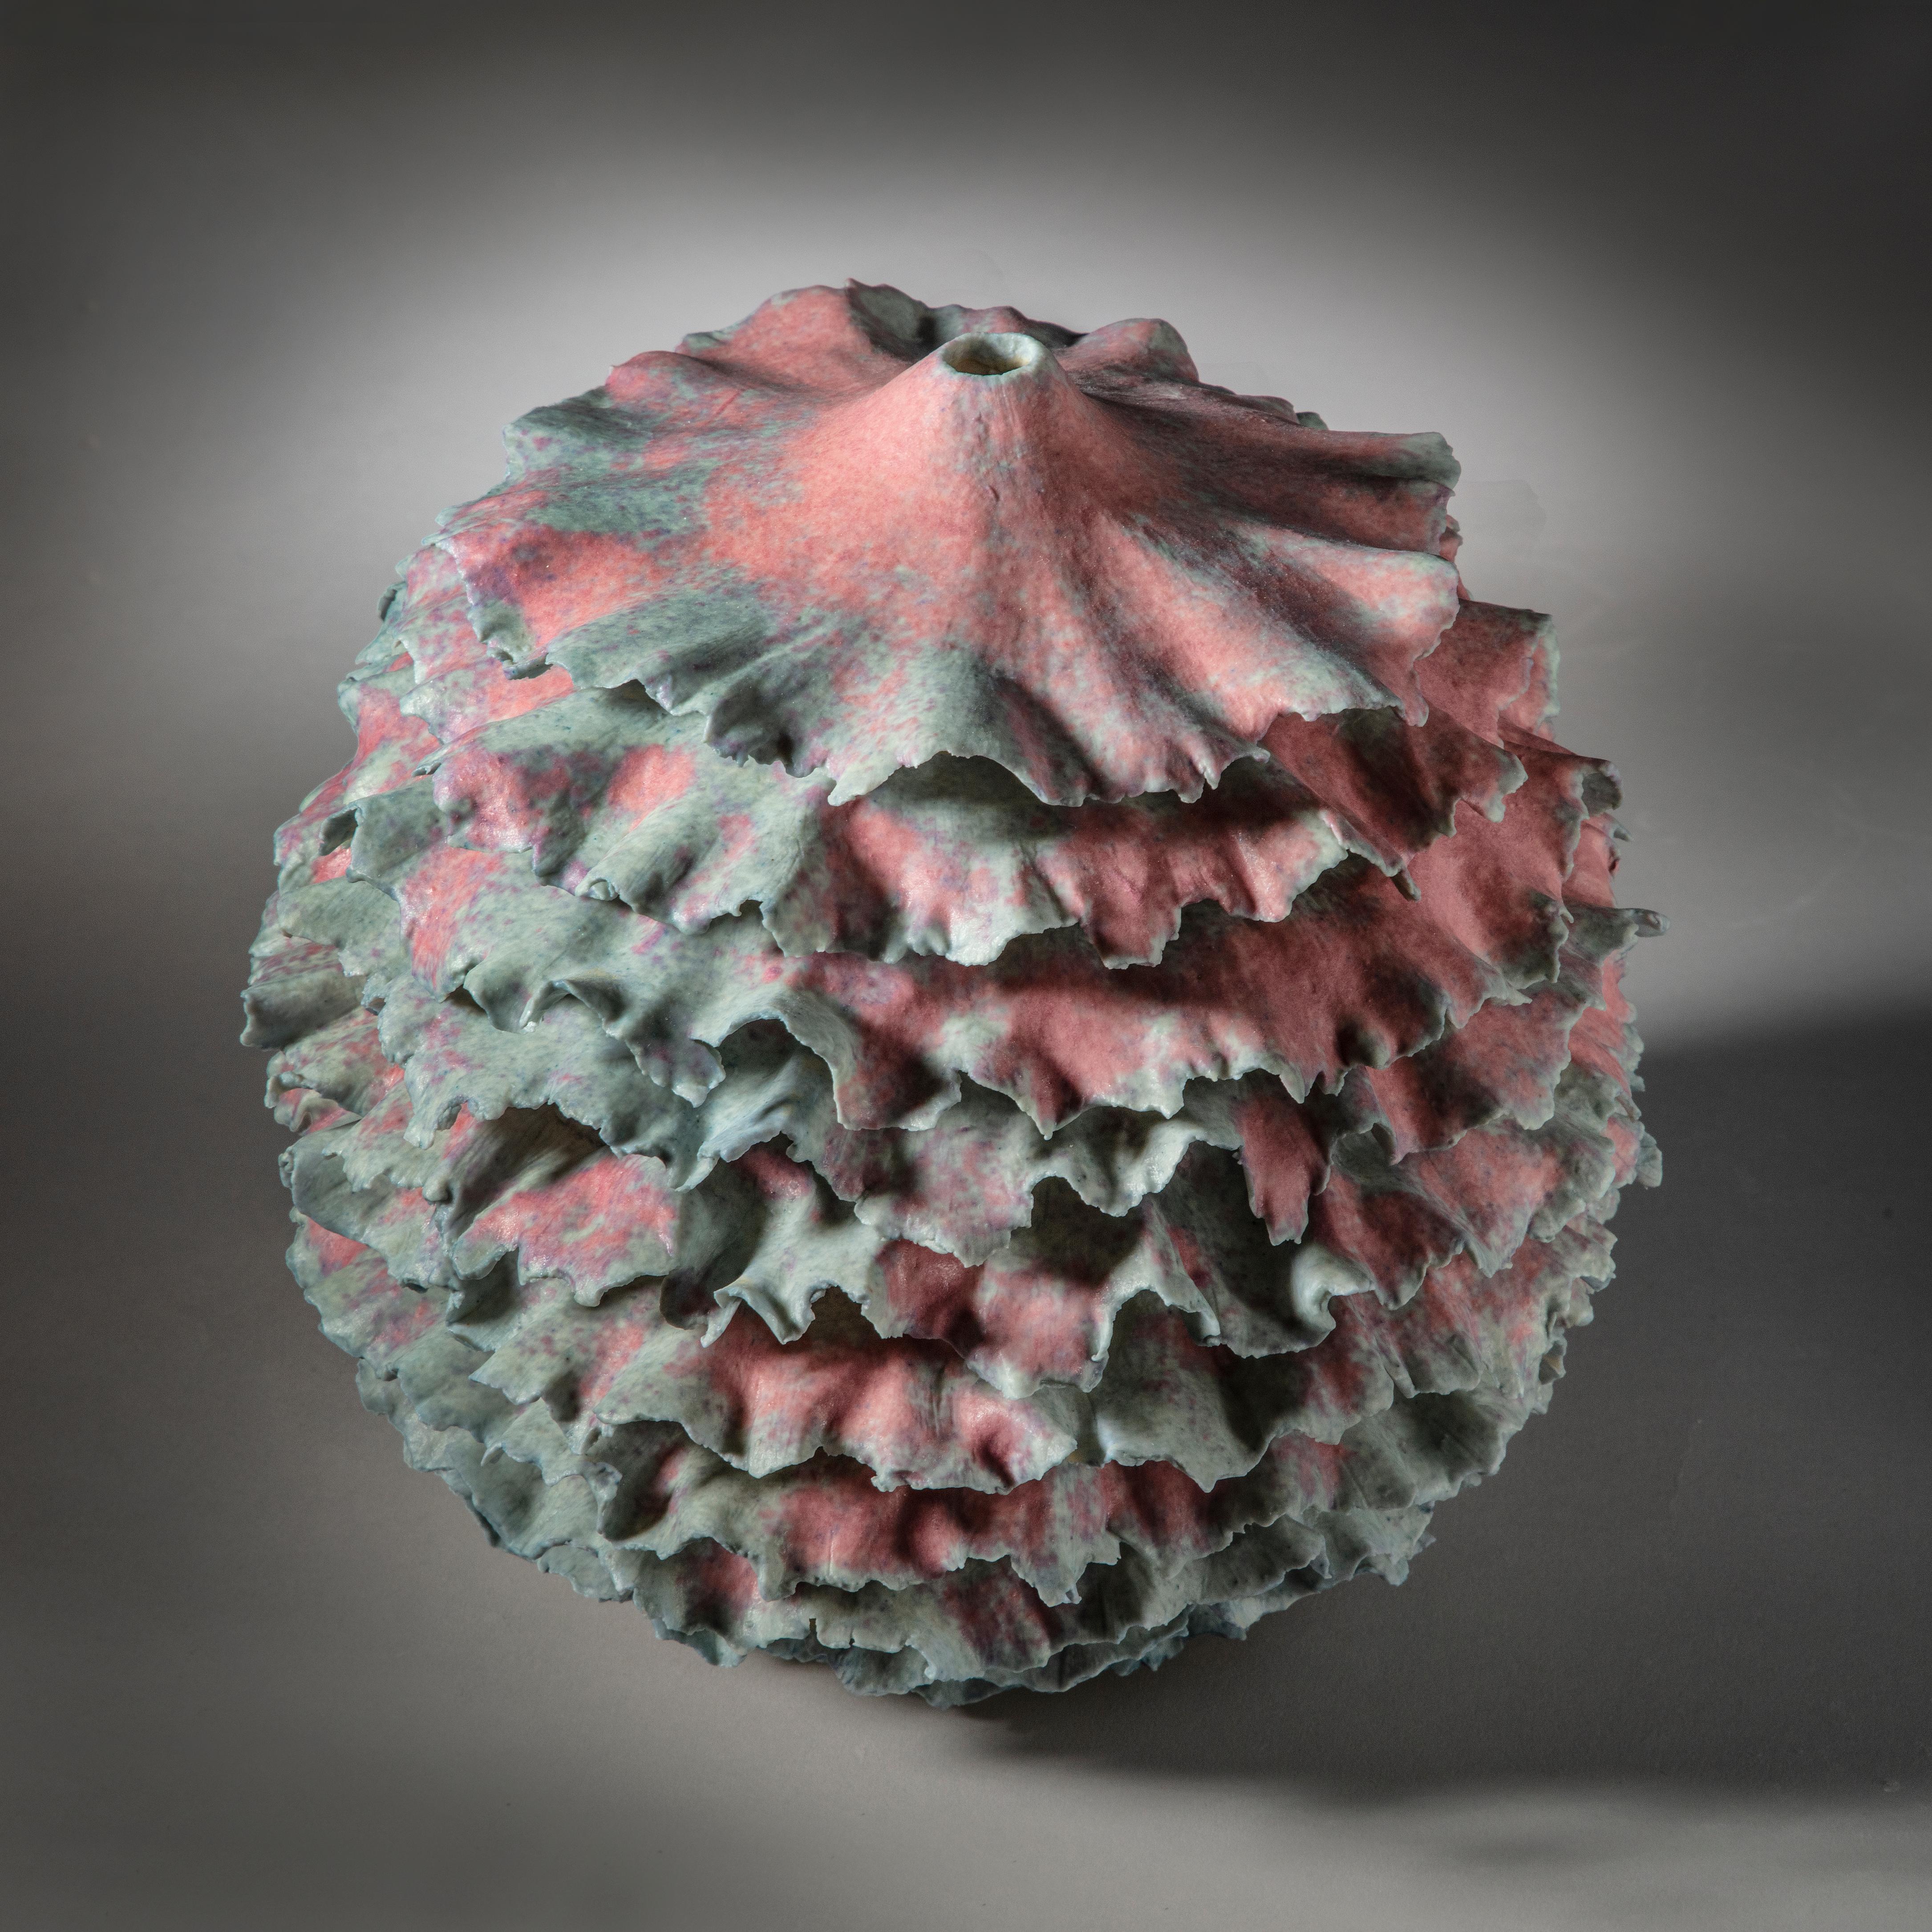 Pink Coral I, 2021, (Ceramic, C. 7.5 in. h x 8.6 in. d, Object No.: 3875)

Sandra Davolio has lived in Copenhagen, Denmark since 1974 and was born in Italy in 1951. She received her degree from the renowned Danish School of Design in 1985 and is